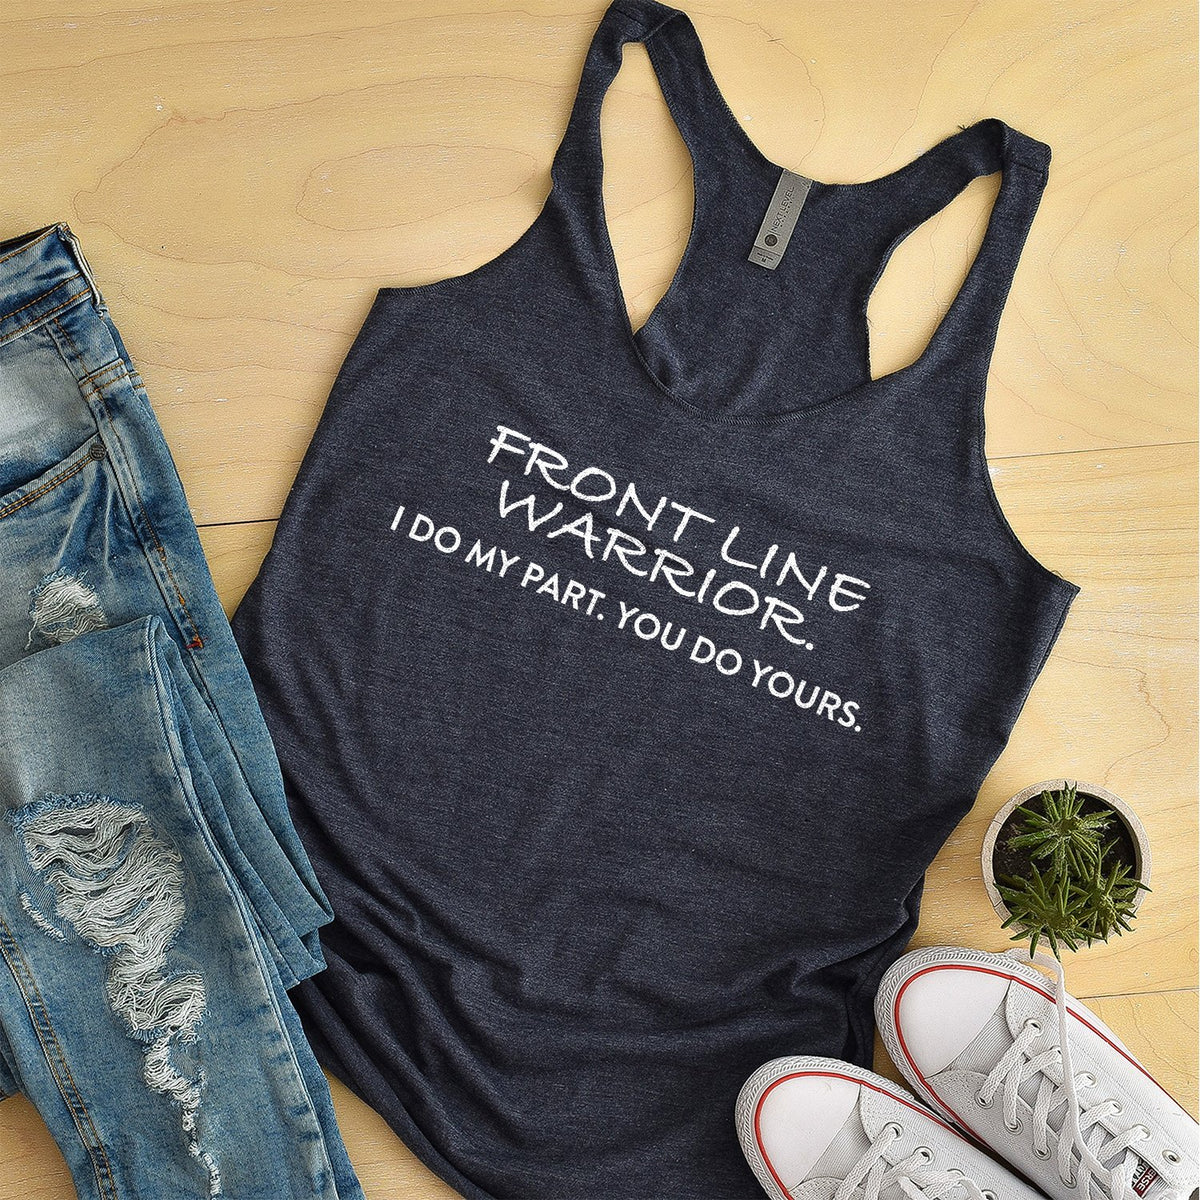 Frontline Warrior I Do My Part You Do Yours - Tank Top Racerback